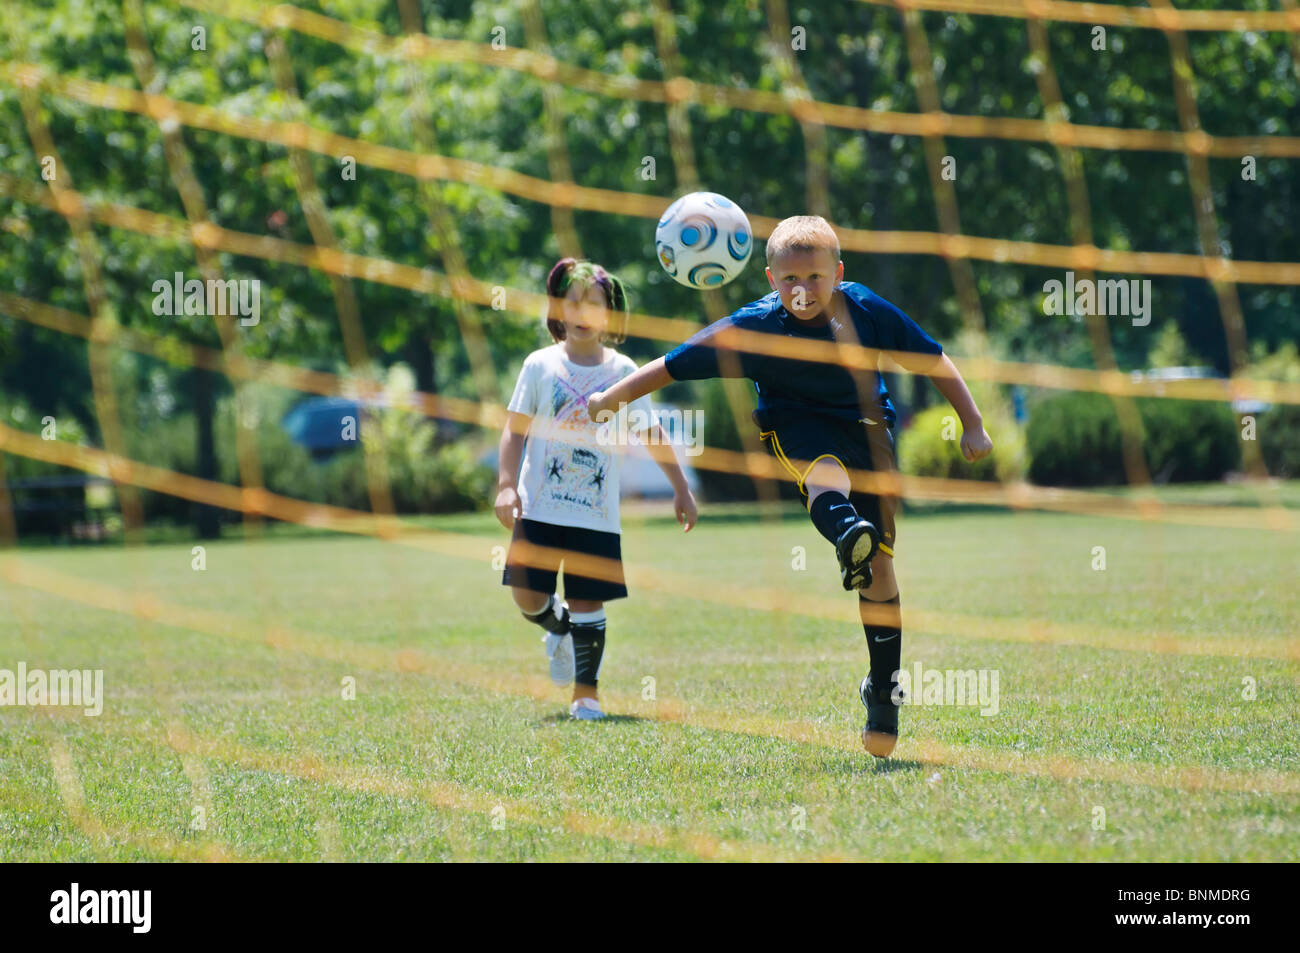 A Boy Kicks A Soccer Ball Into The Goal Net During Practice At Summer Soccer Camp In Tumwater Washington Stock Photo Alamy